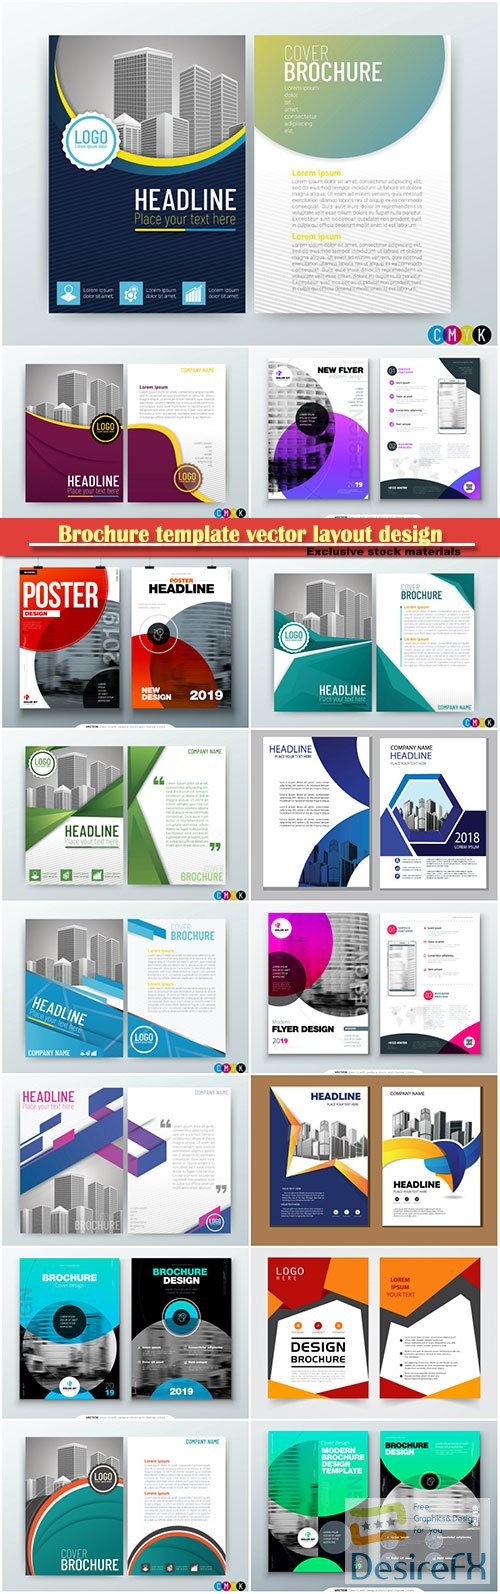 Brochure template vector layout design, corporate business annual report, magazine, flyer mockup # 167